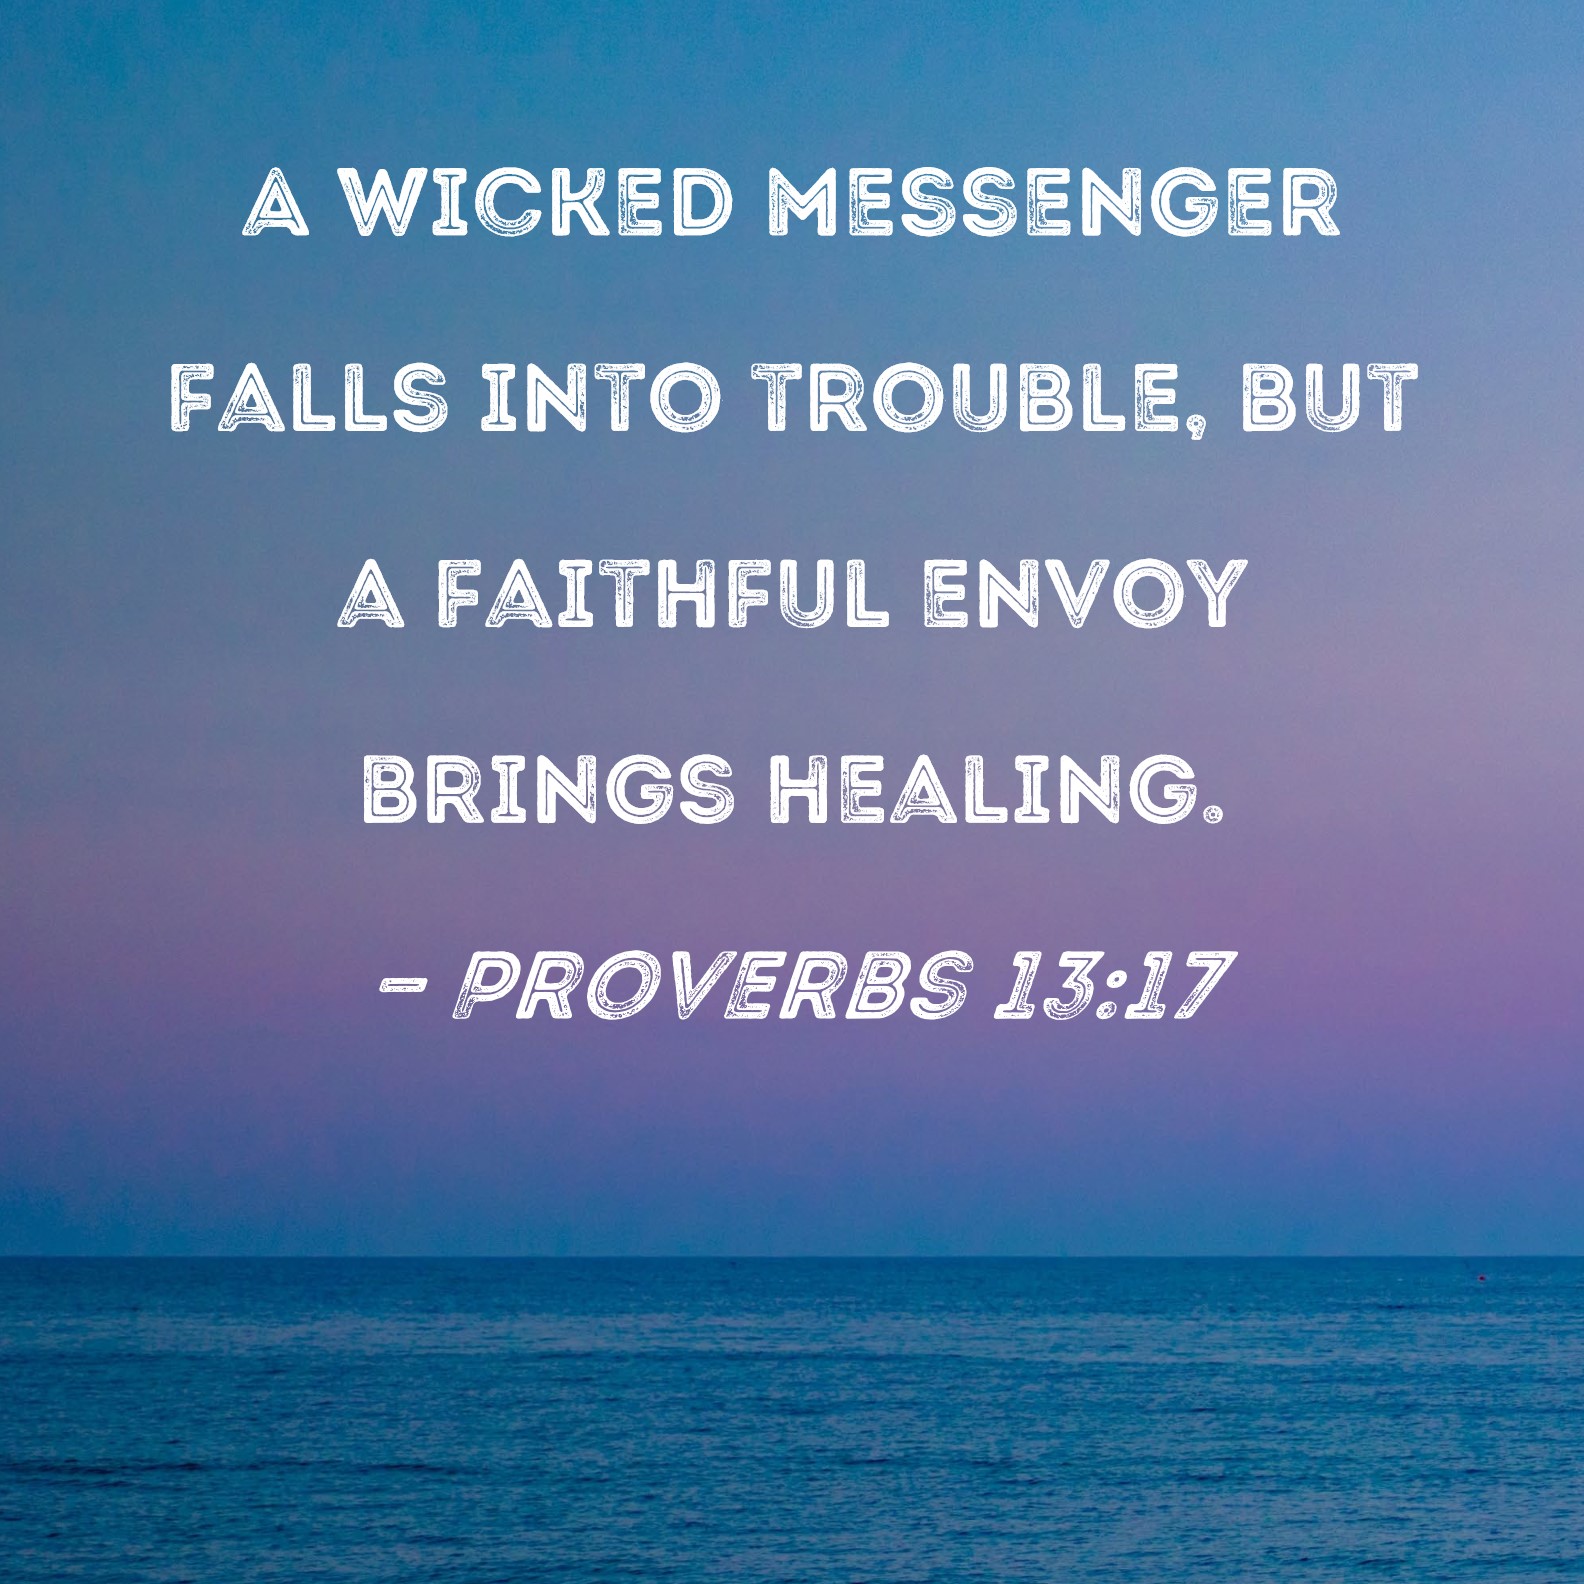 Proverbs 13:17 A wicked messenger falls into trouble, but a